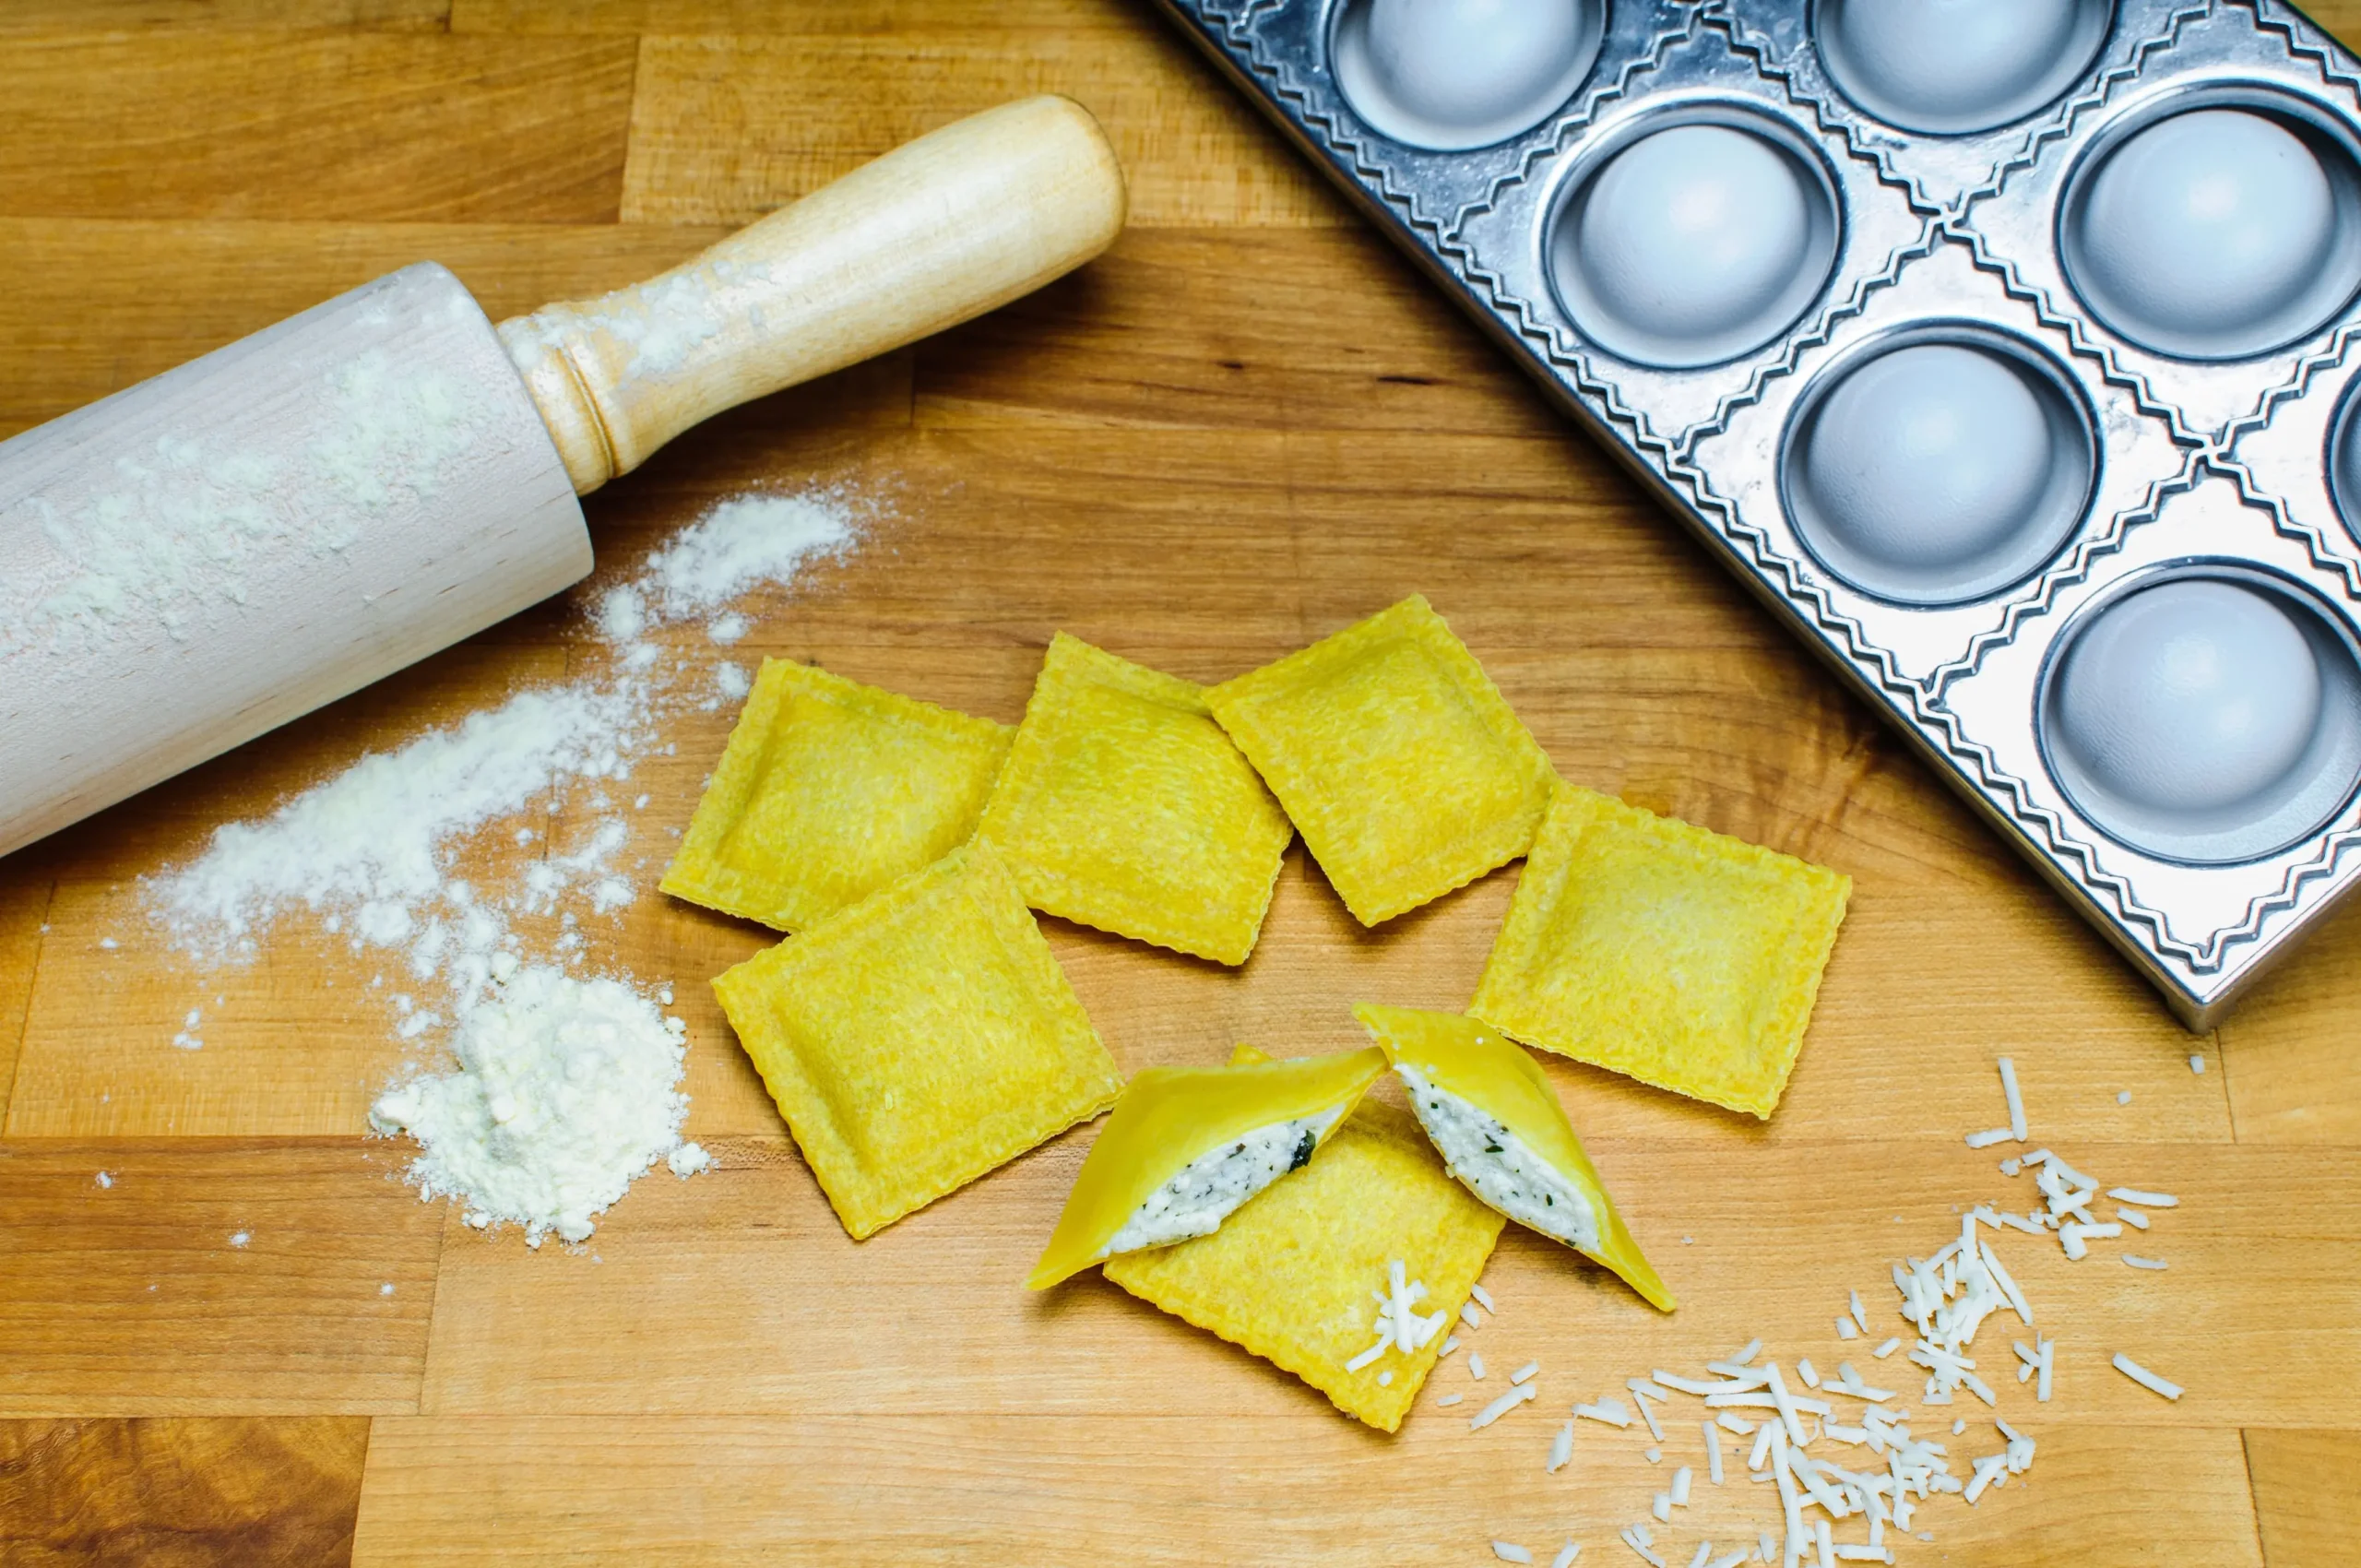 In this image, handmade ravioli with the classic ricotta and spinach filling are visible, waiting to be cooked.